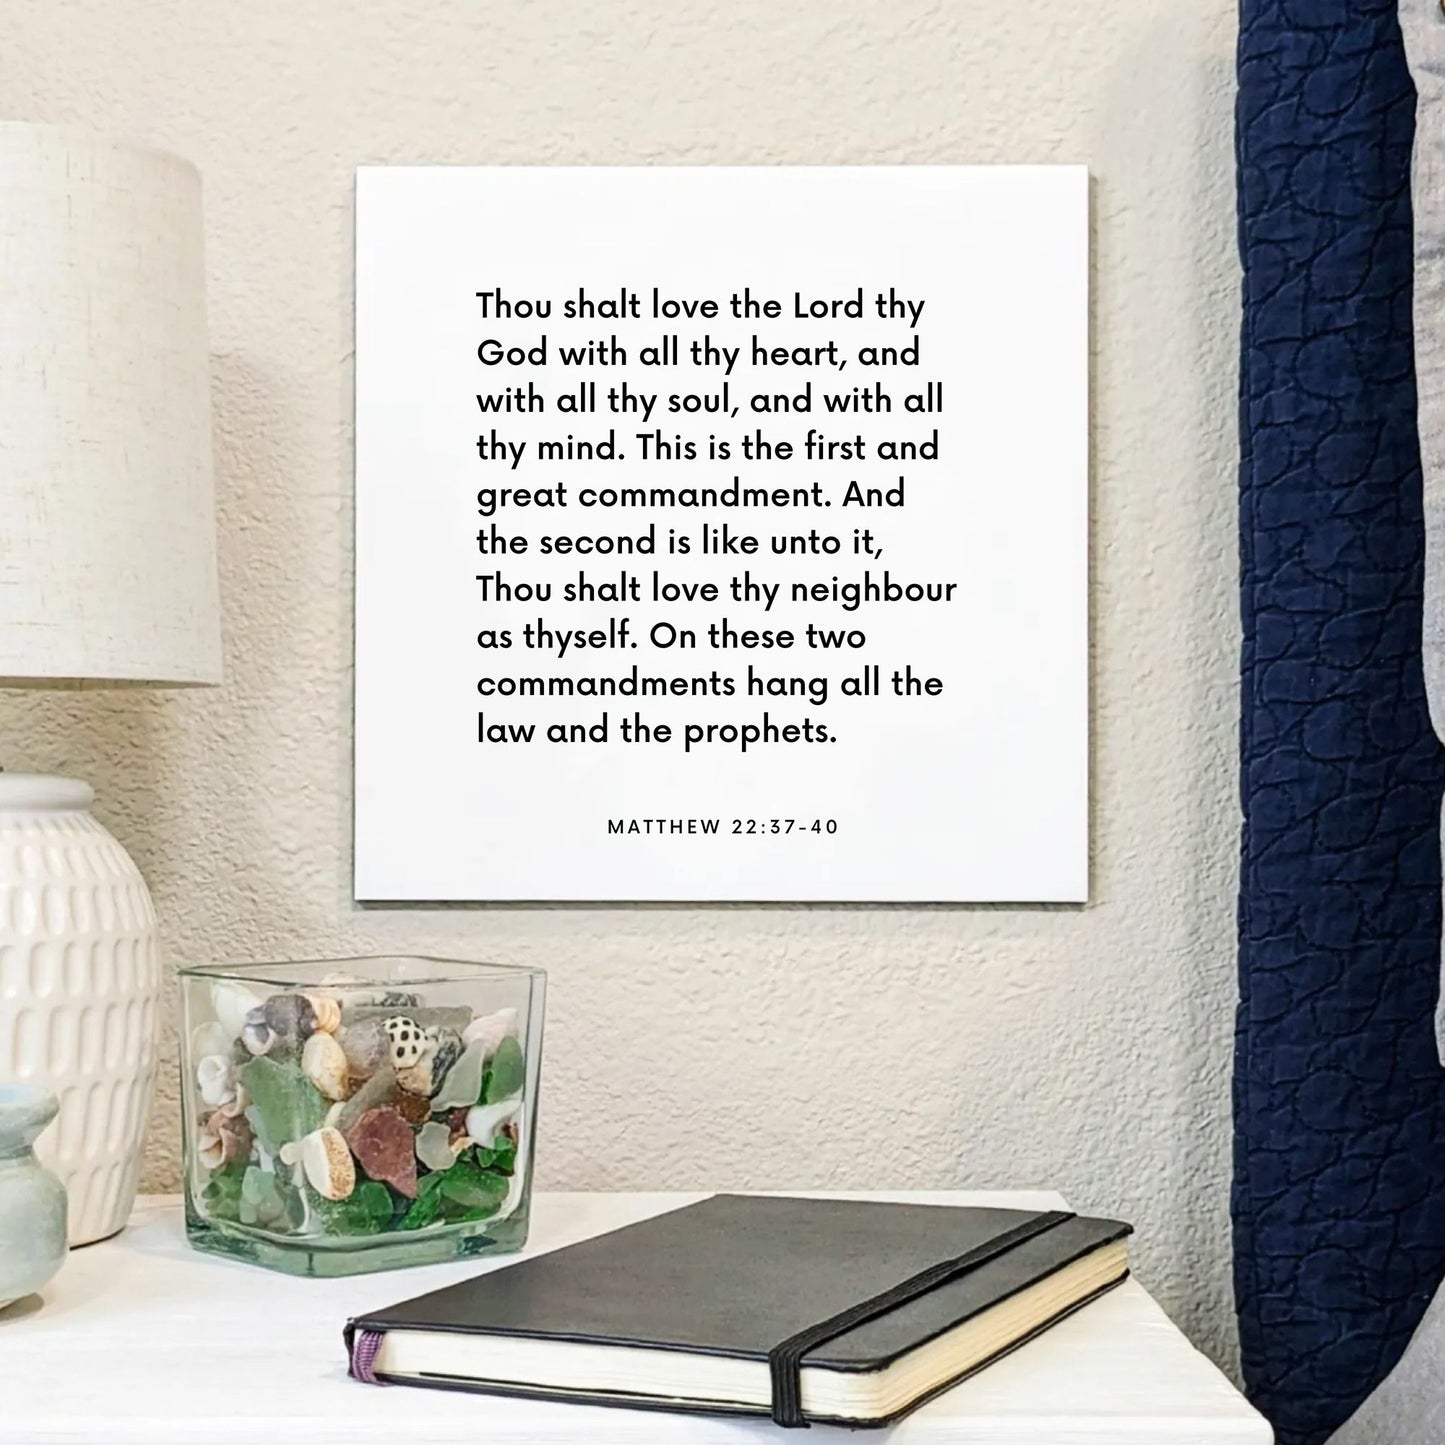 Bedside mouting of the scripture tile for Matthew 22:37-40 - "Thou shalt love the Lord thy God with all thy heart"